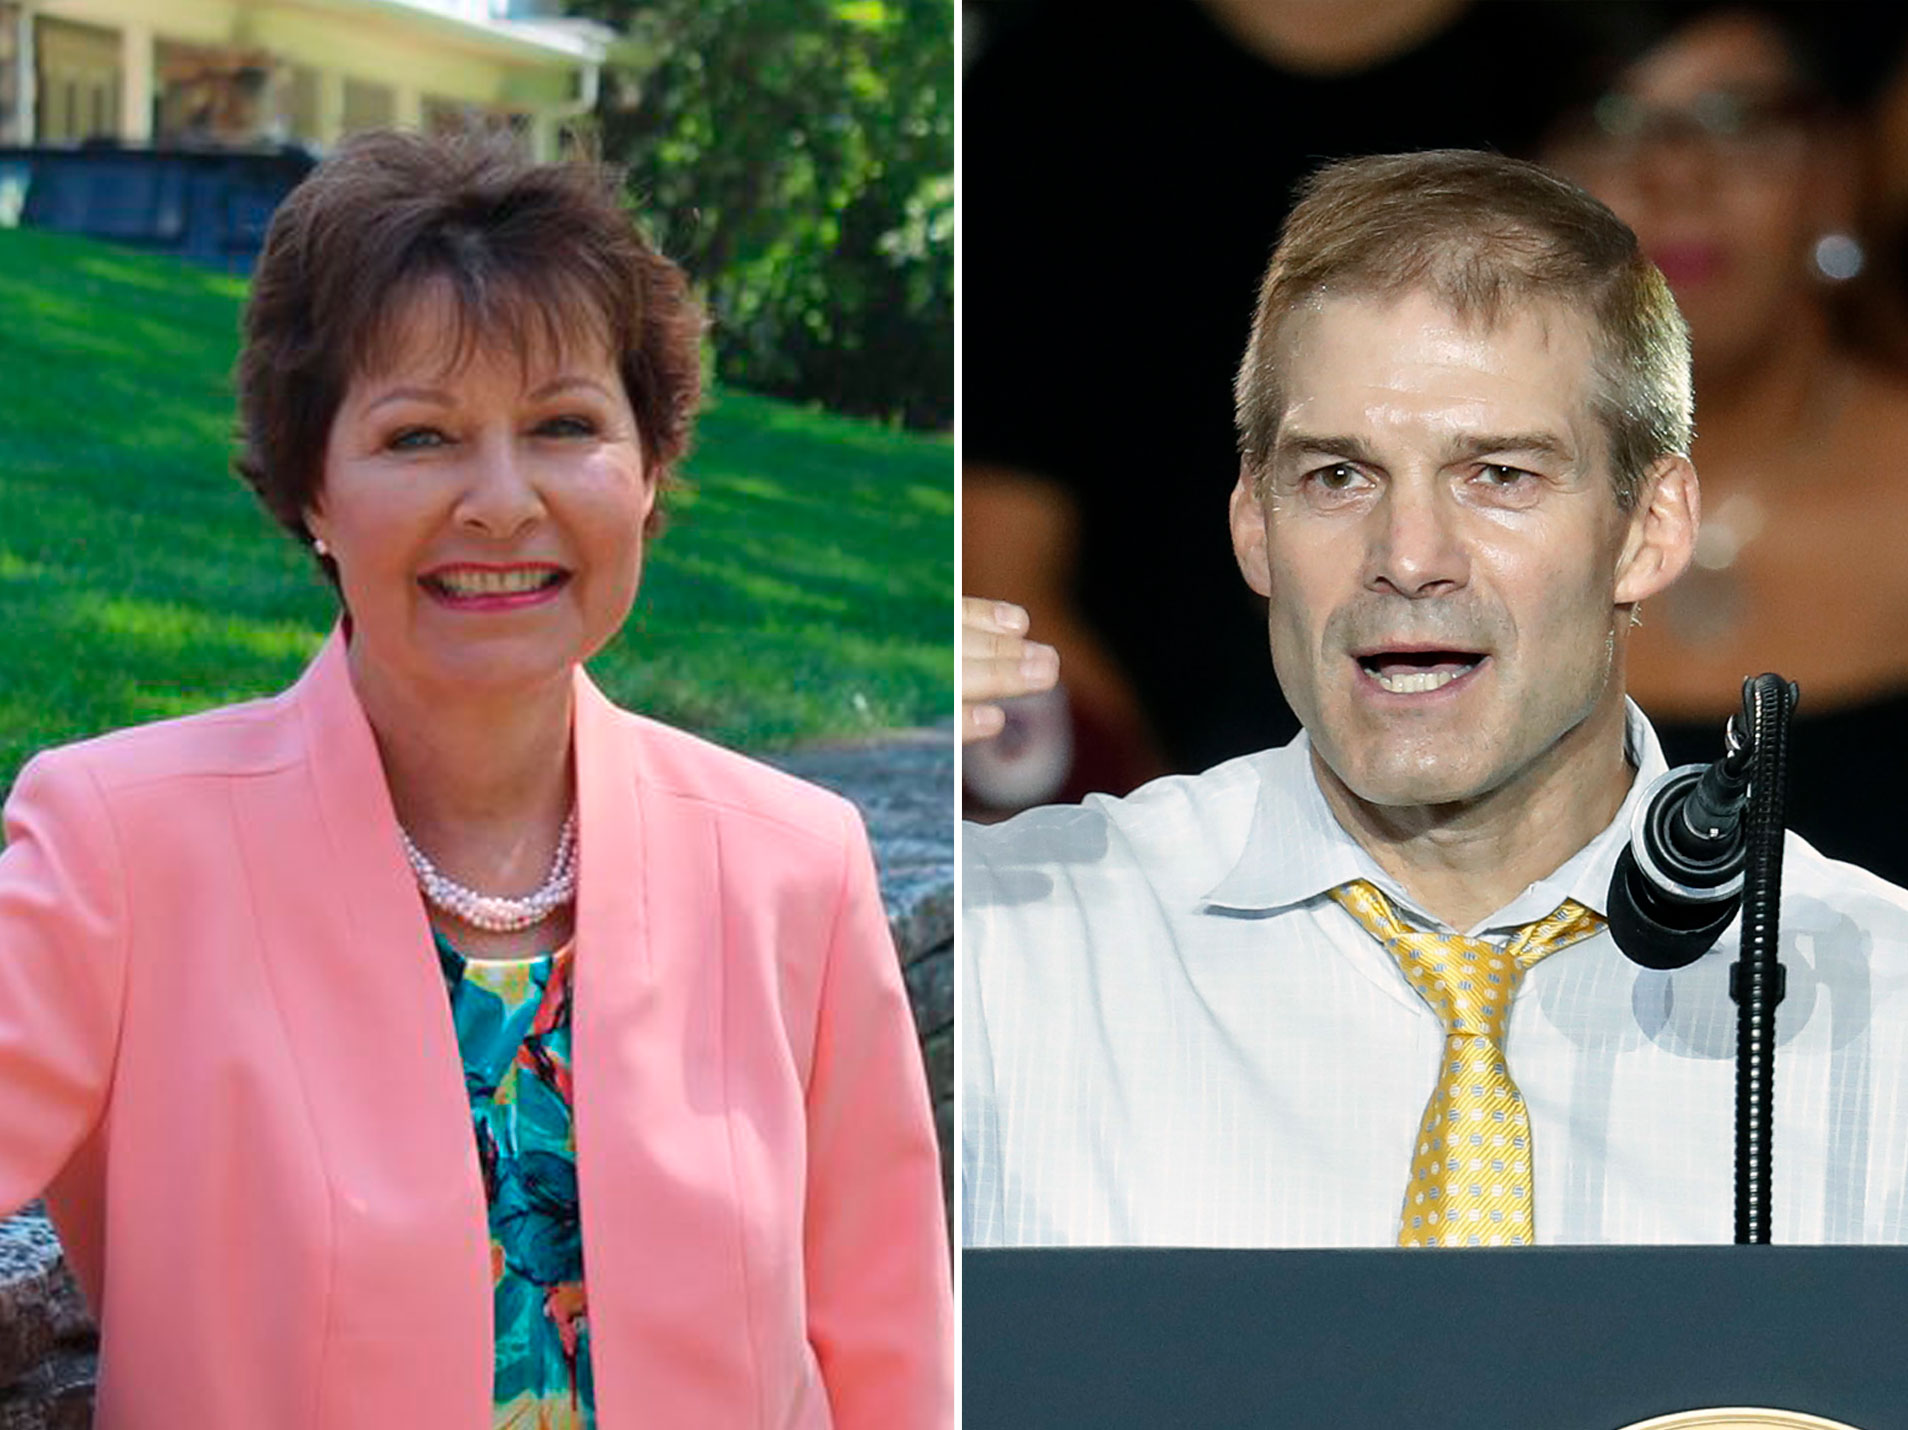 Janet Garrett tries for third time to unseat Jim Jordan in Ohio's 4th District - The Blade